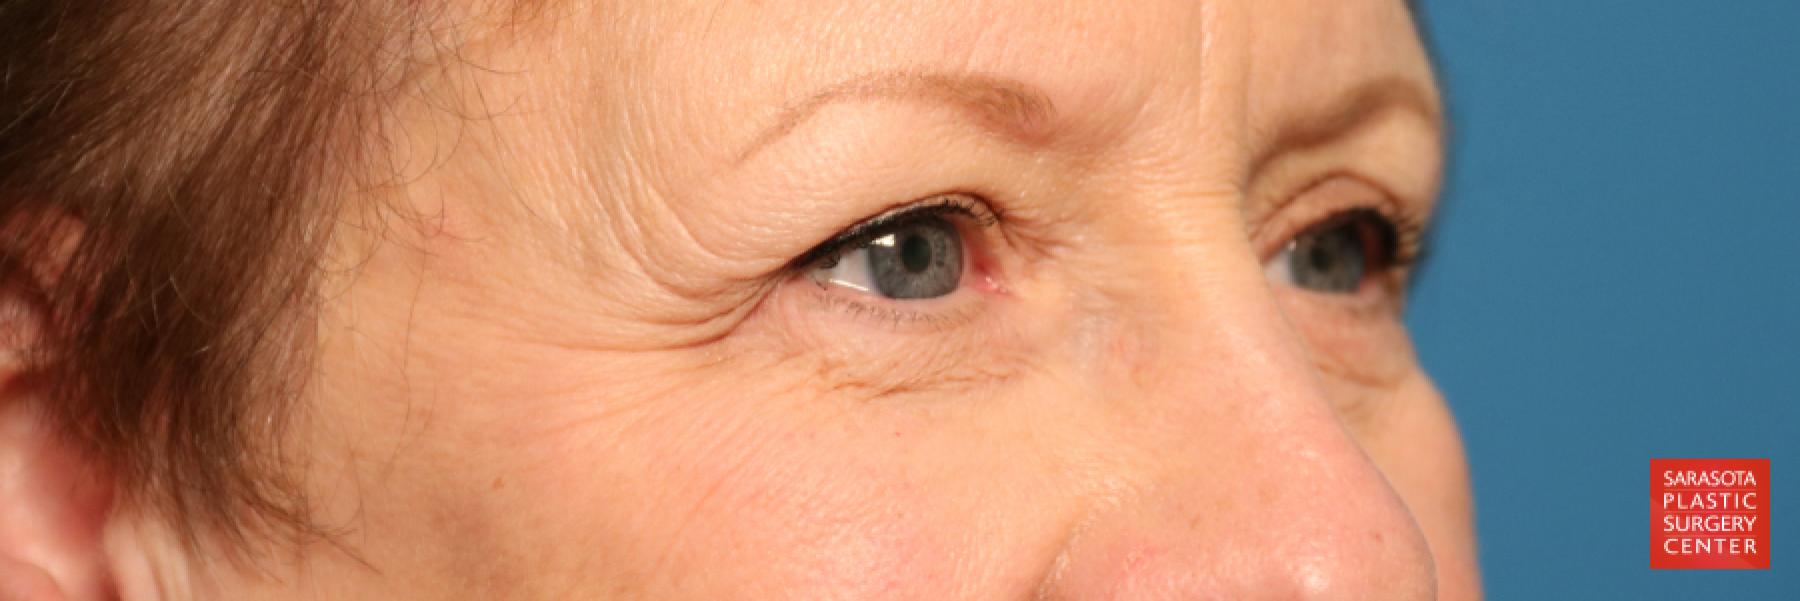 Eyelid Lift: Patient 20 - Before 4